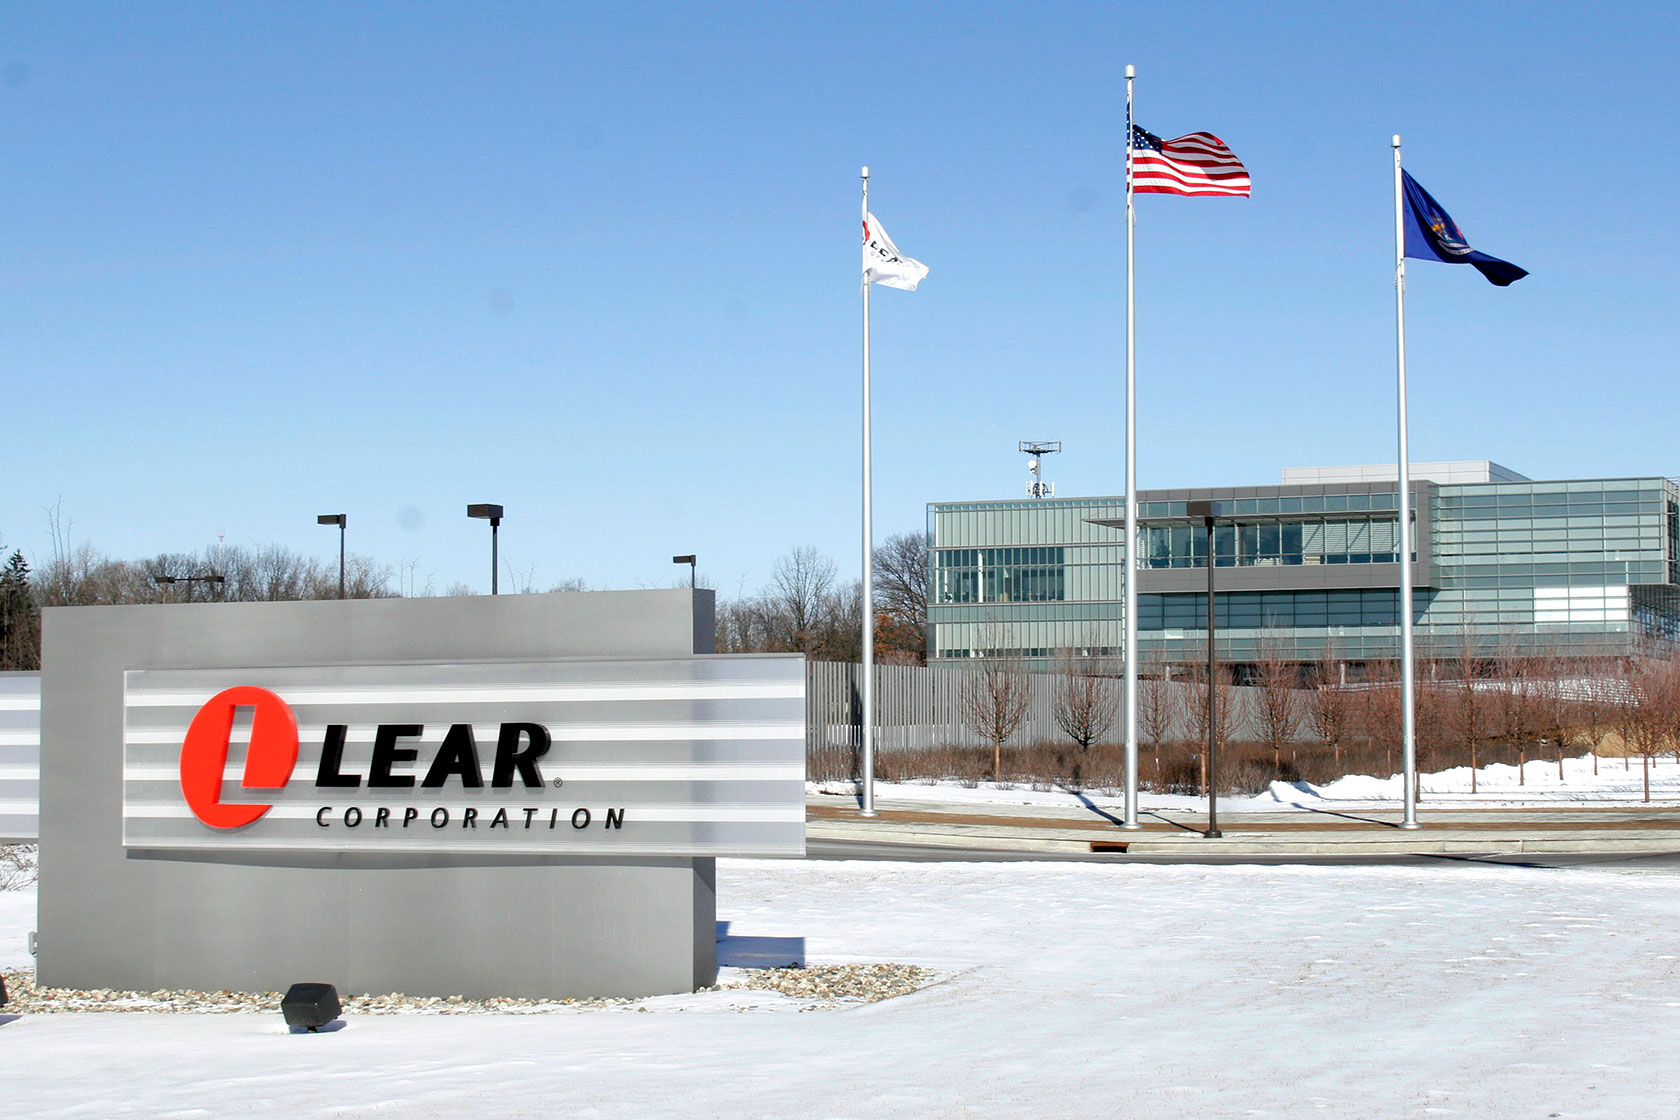 Photo shows the Lear Corp. sign in front of a glass building with three flags flying in front of it, and snow on the ground